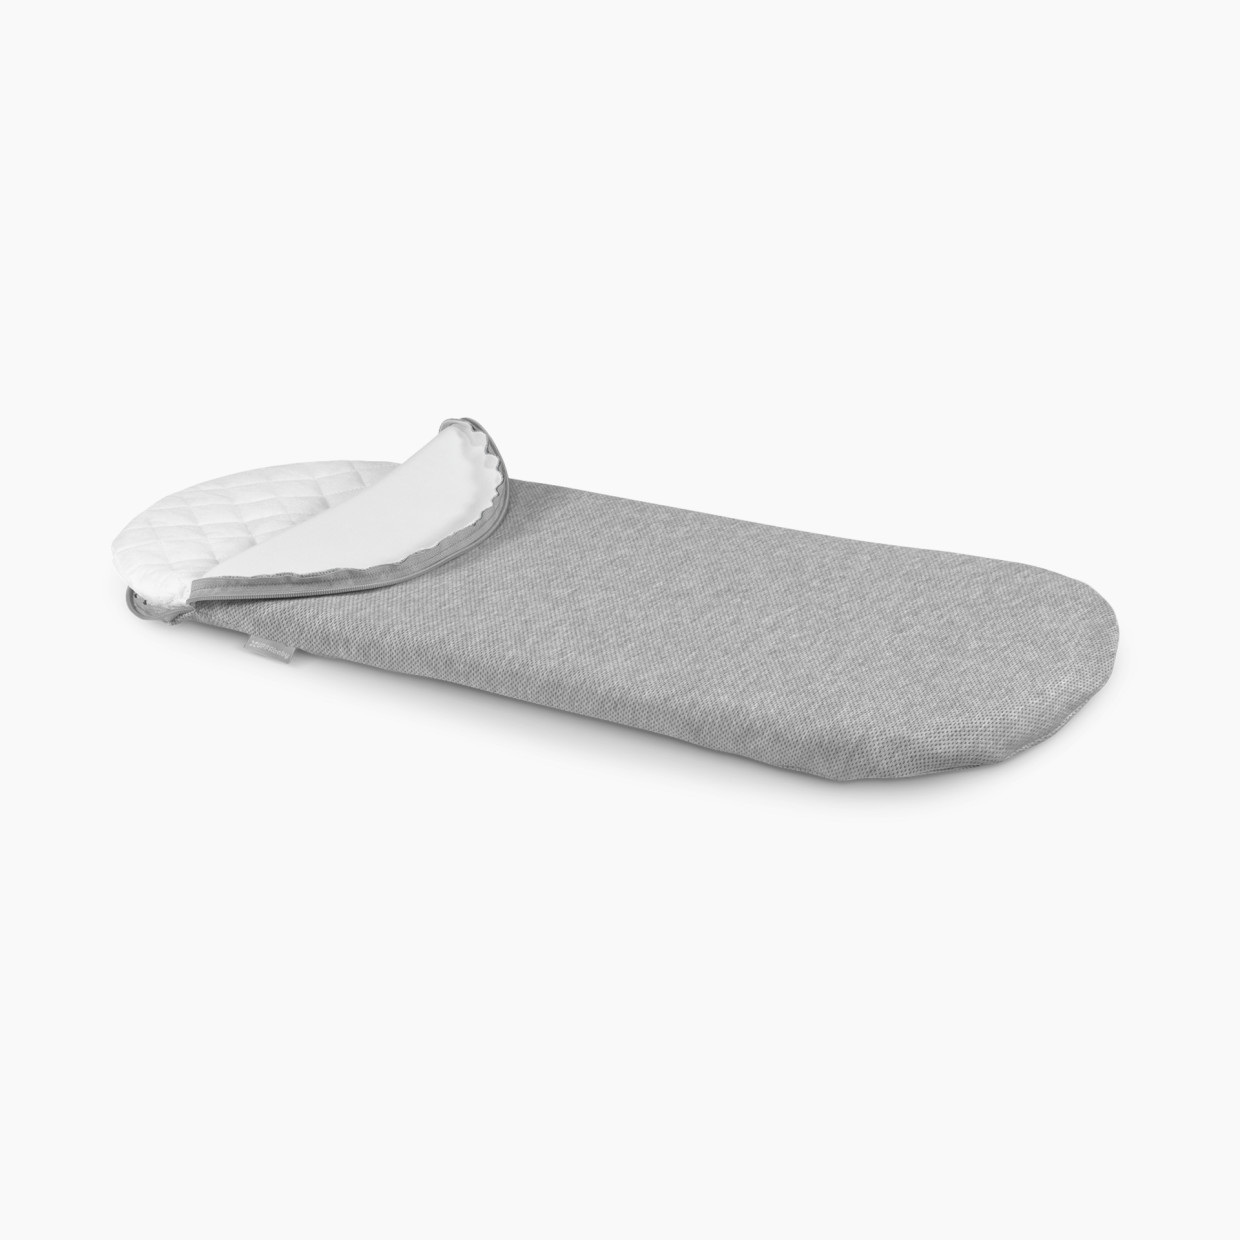 UPPAbaby Mattress Cover for UPPABaby Bassinet - Light Grey.